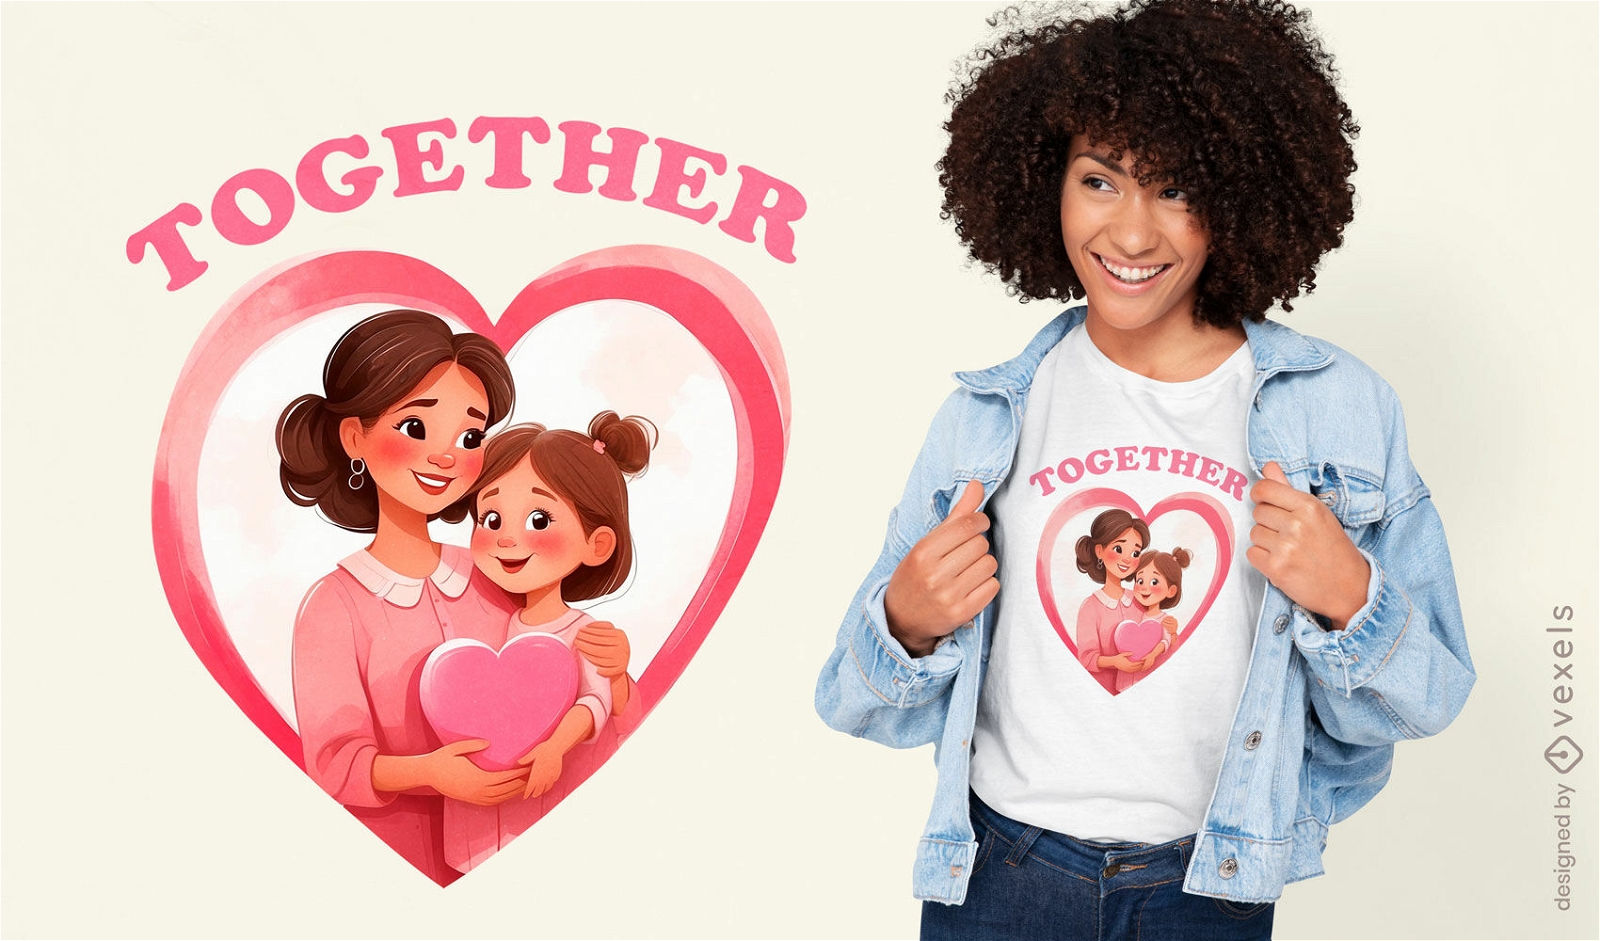 Togetherness family quote t-shirt design